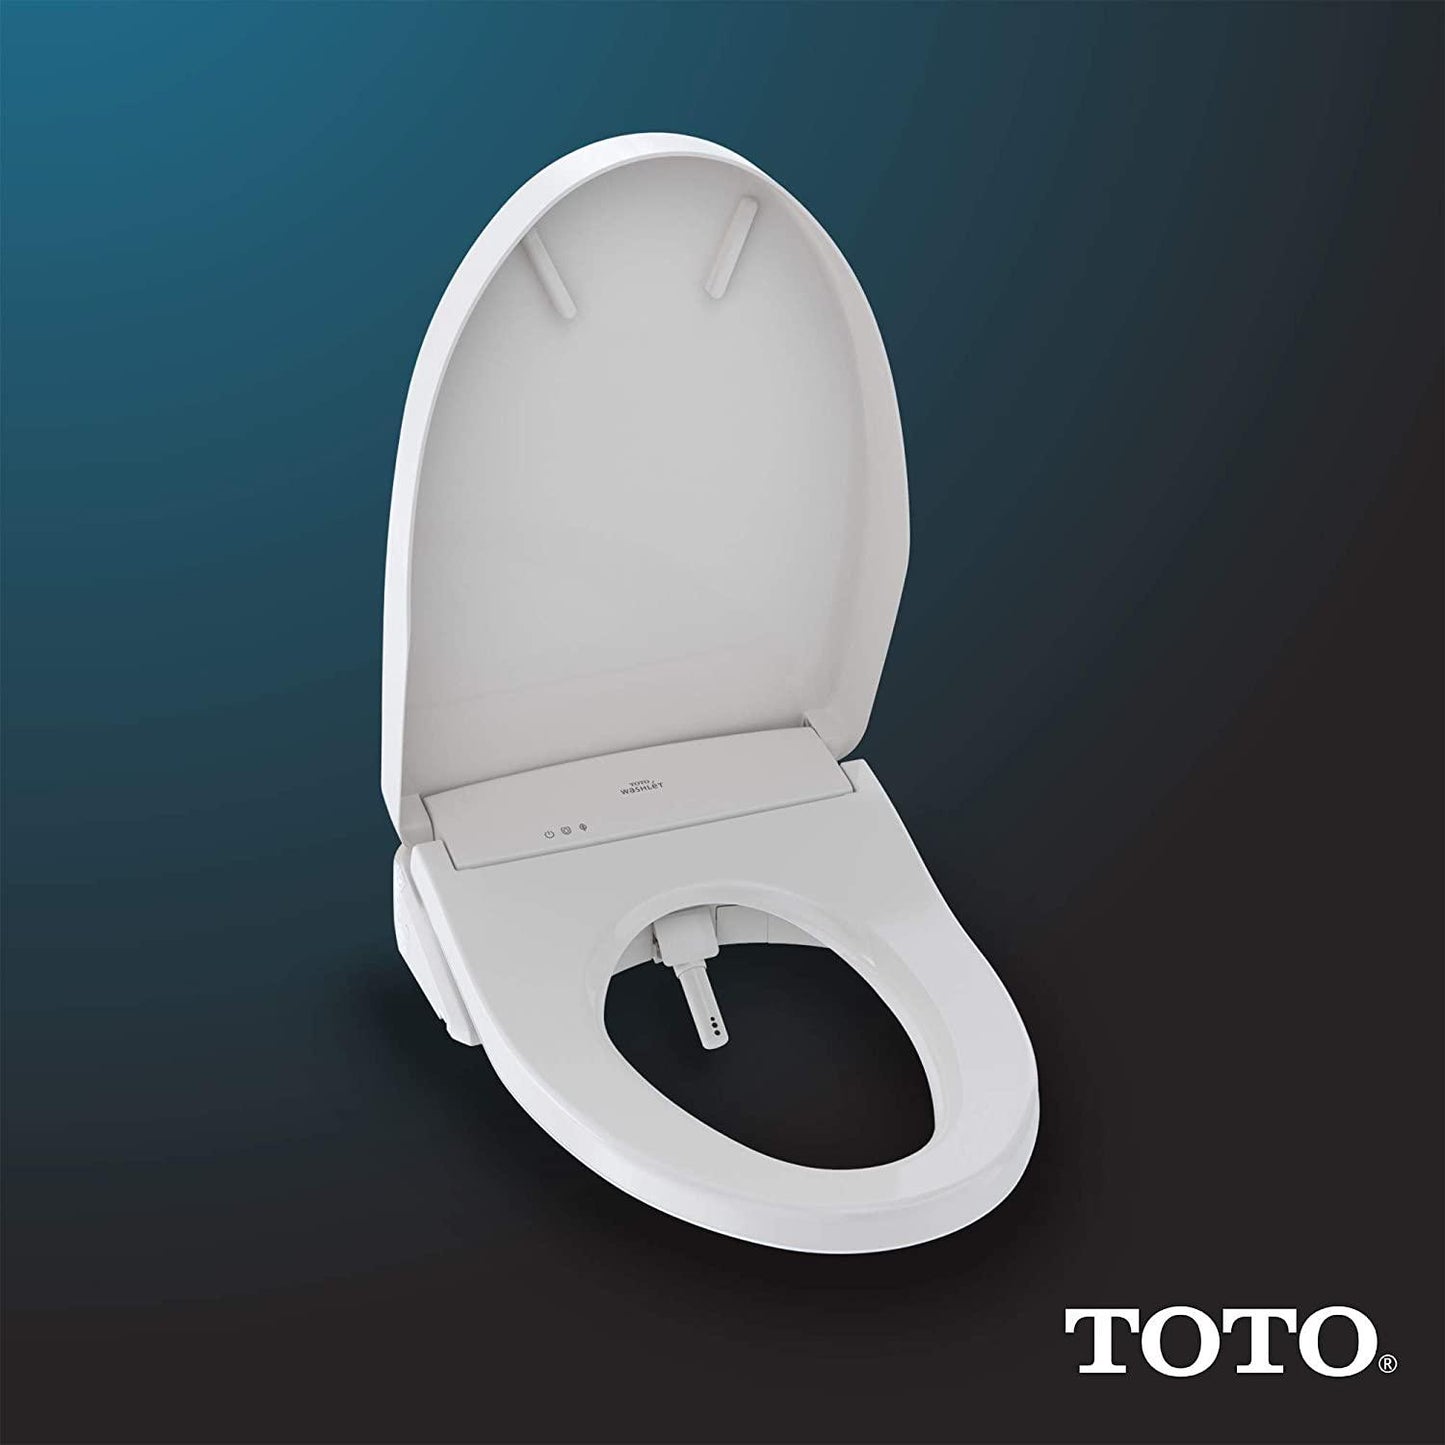 TOTO Electronic Bidet S550E, Toilet Seat with Cleansing Warm, Nightlight, Auto Open and Close Lid, Instantaneous Water Heating, and EWATER+, Contemporary, Cotton White